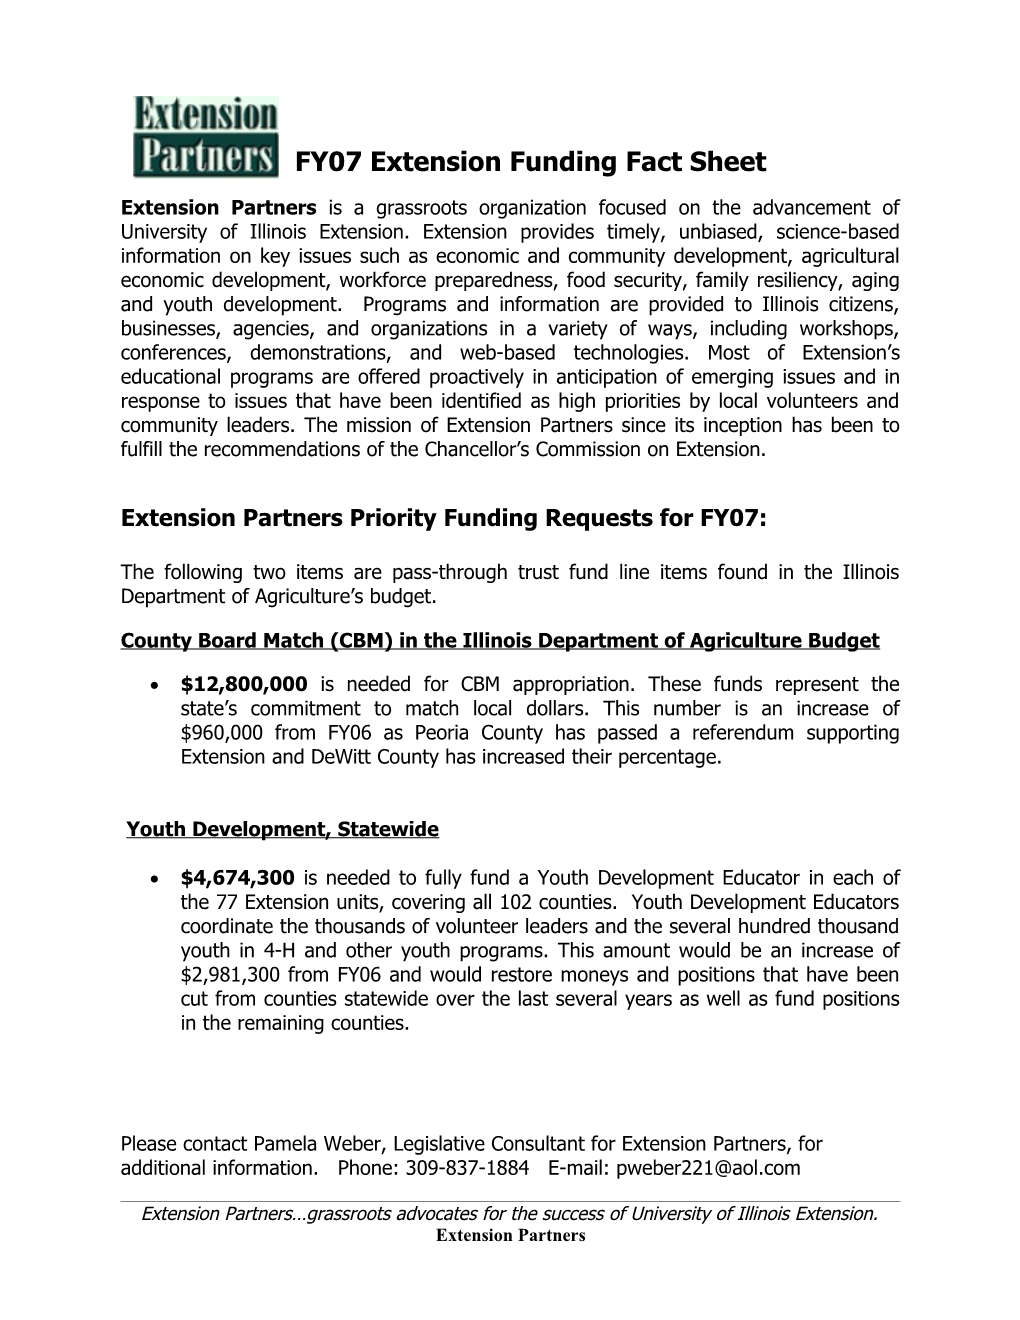 FY07 Extension Funding Fact Sheet